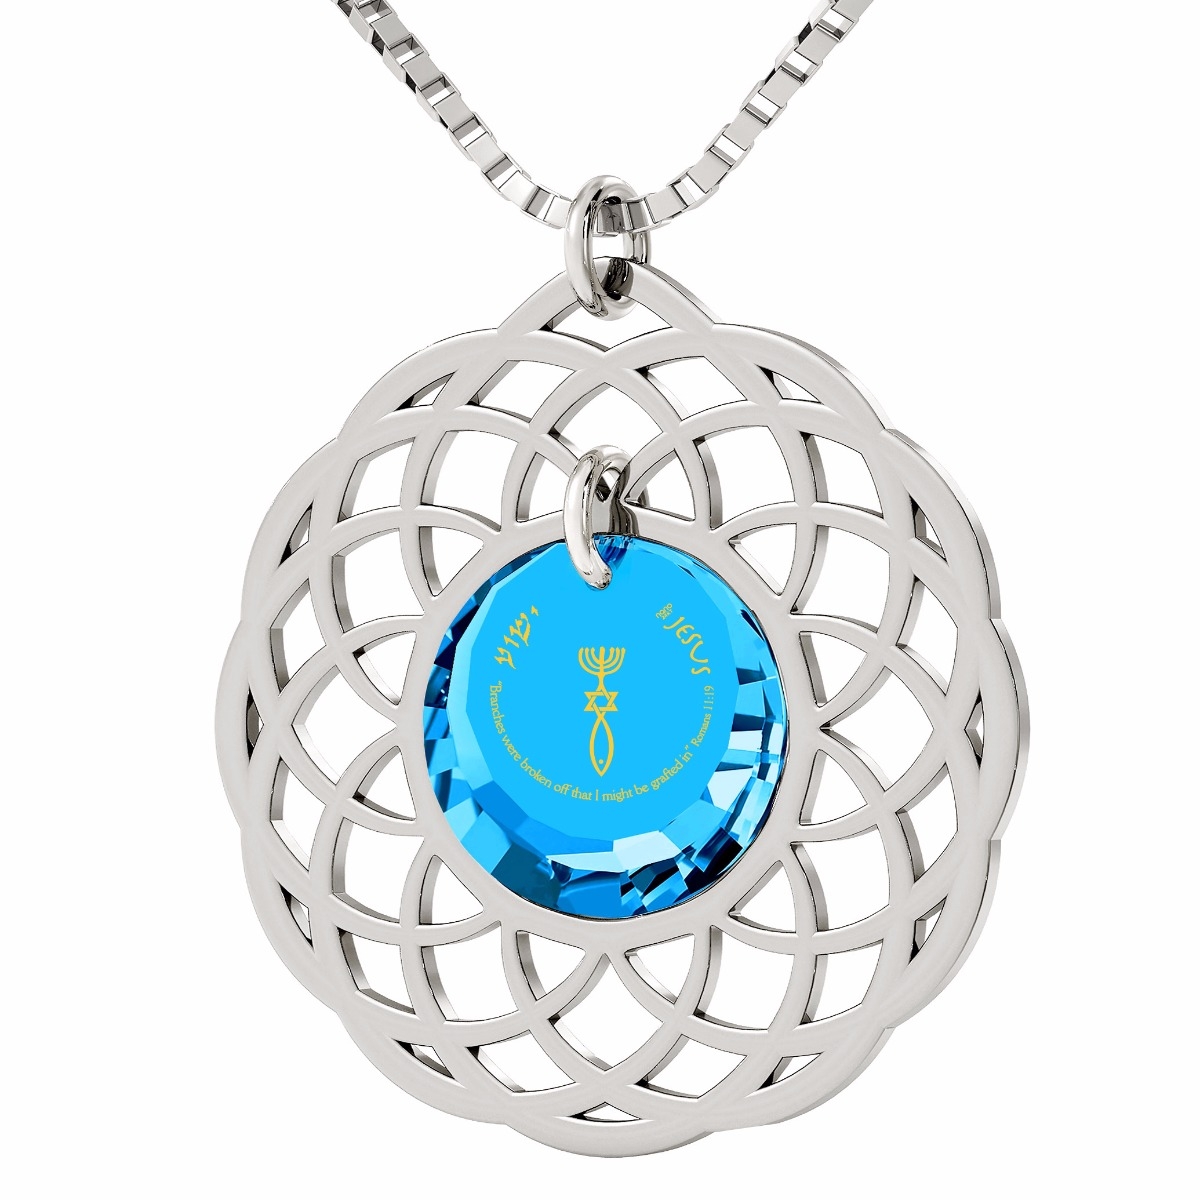 Nano Jewelry Sterling Silver & Crystal Grafted-In Mandala Necklace with 24k Gold Micro-Inscription (Blue) - 1